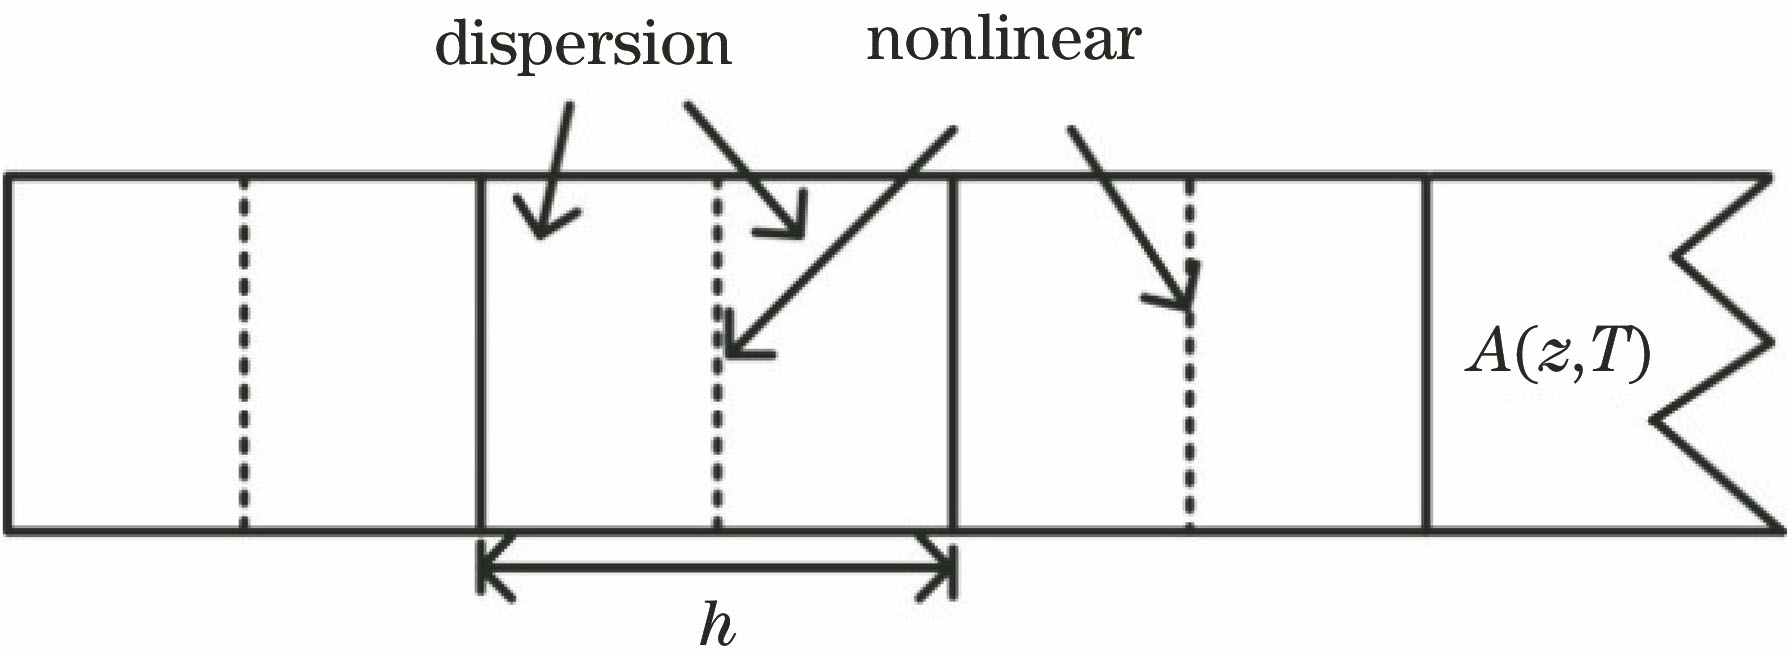 Schematic of fractional Fourier transform method